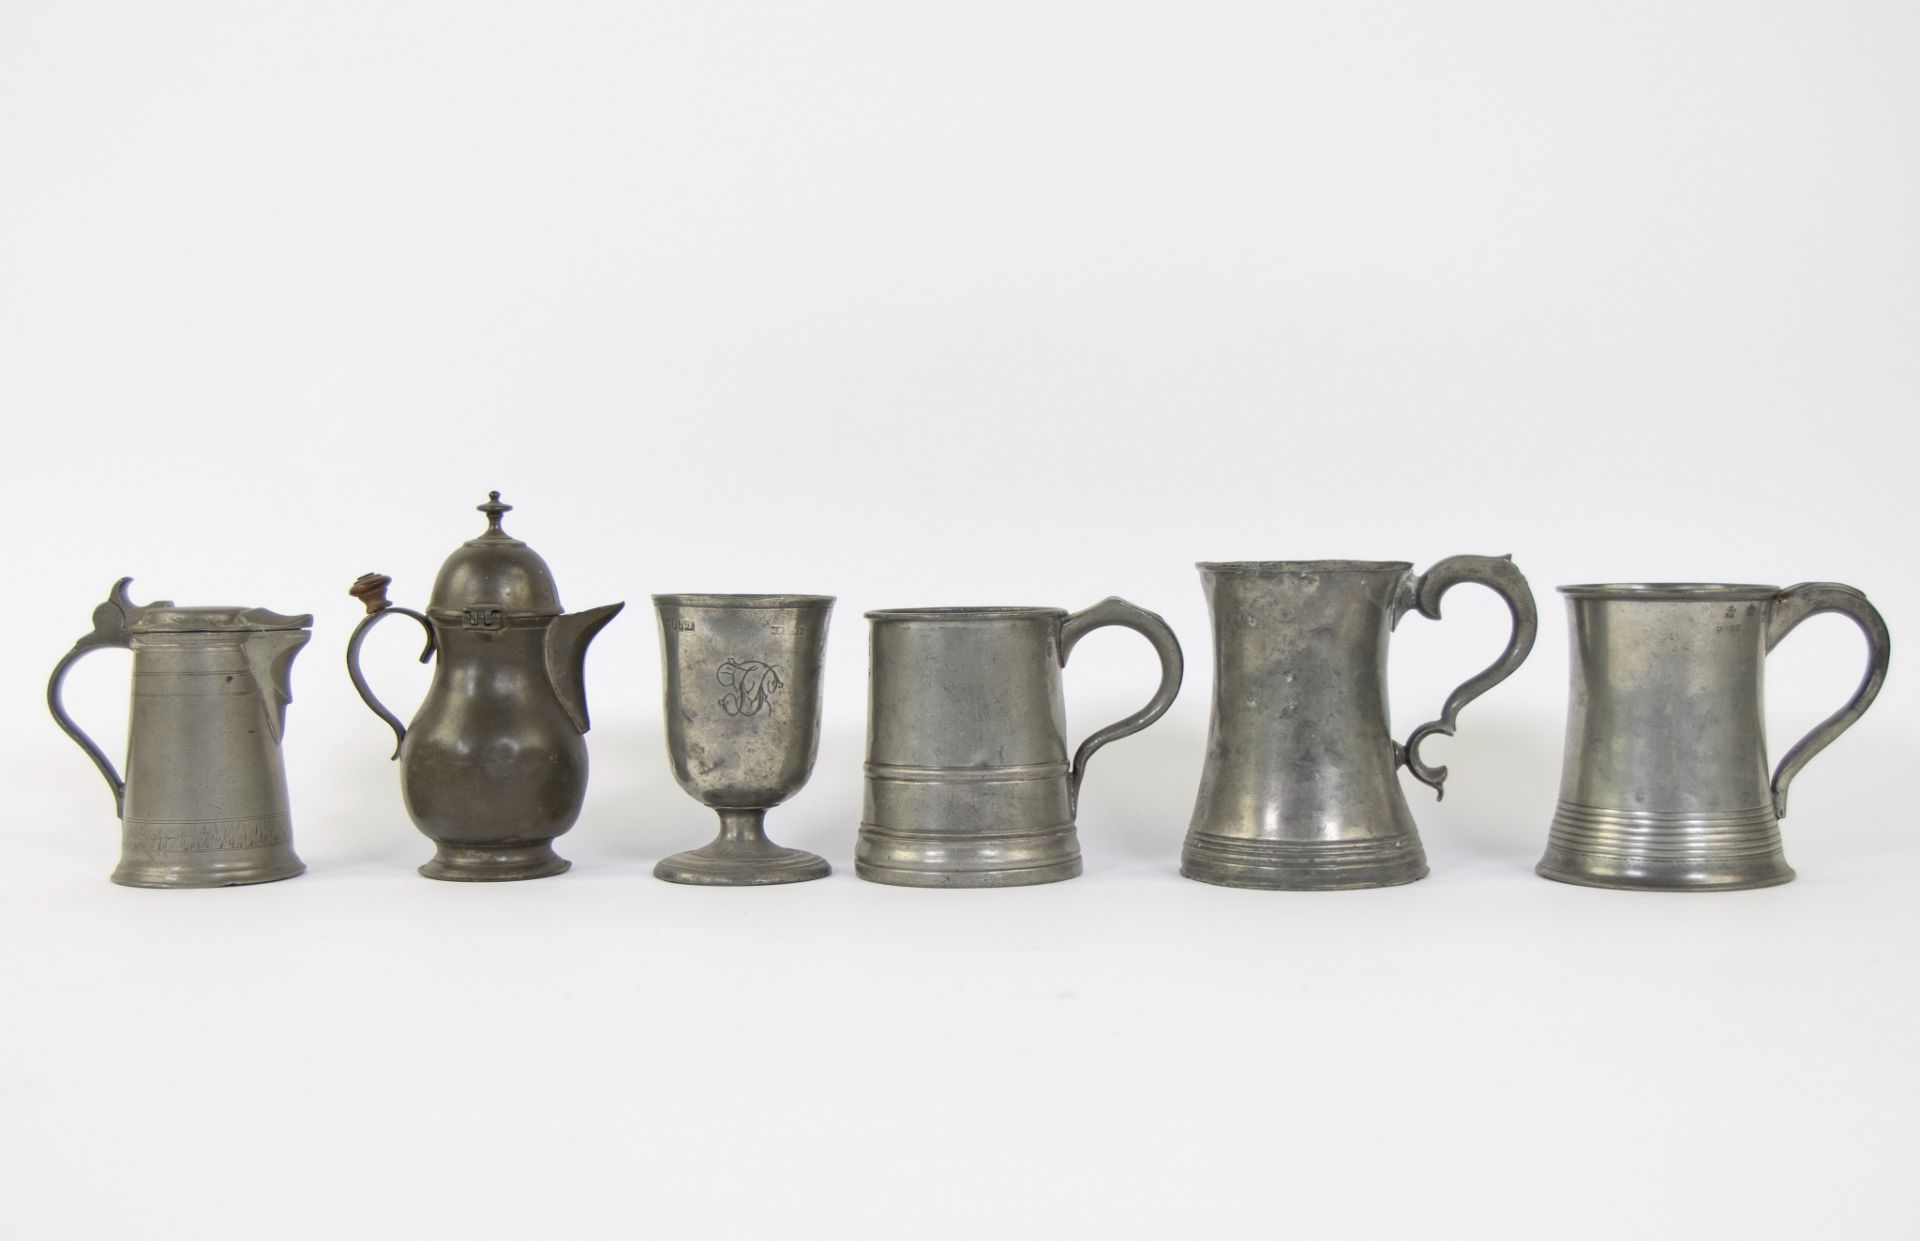 Large collection of pewter pitchers and beer pots, 18th/19th century - Image 2 of 10